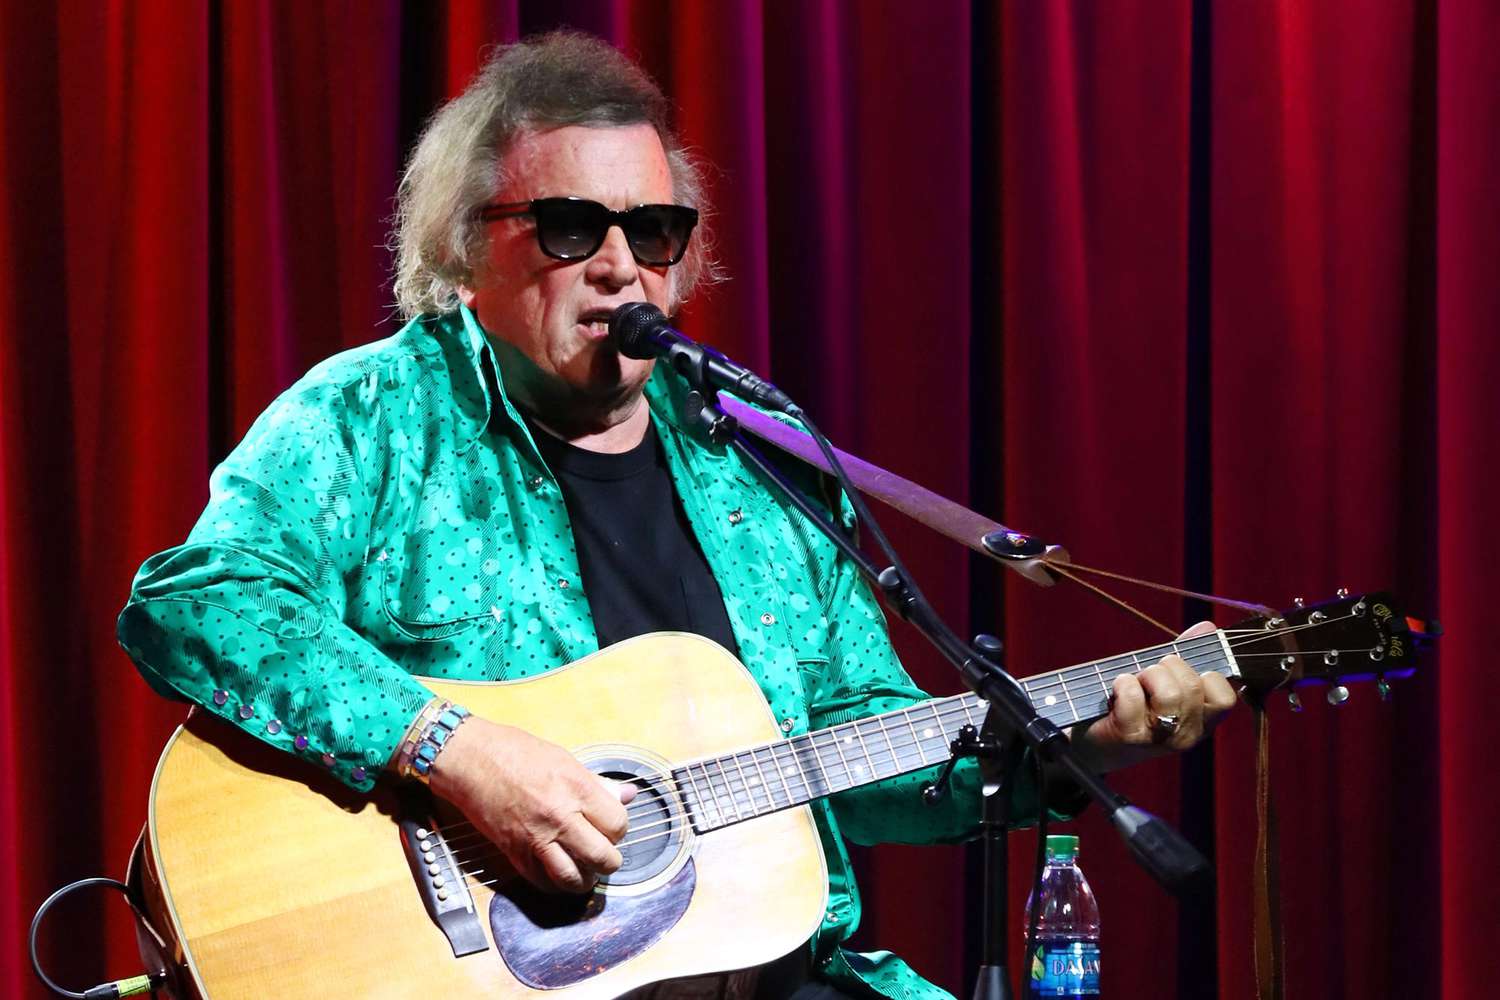 Don McLean performs at An Evening With Don McLean at the GRAMMY Museum on March 25, 2019 in Los Angeles, California.